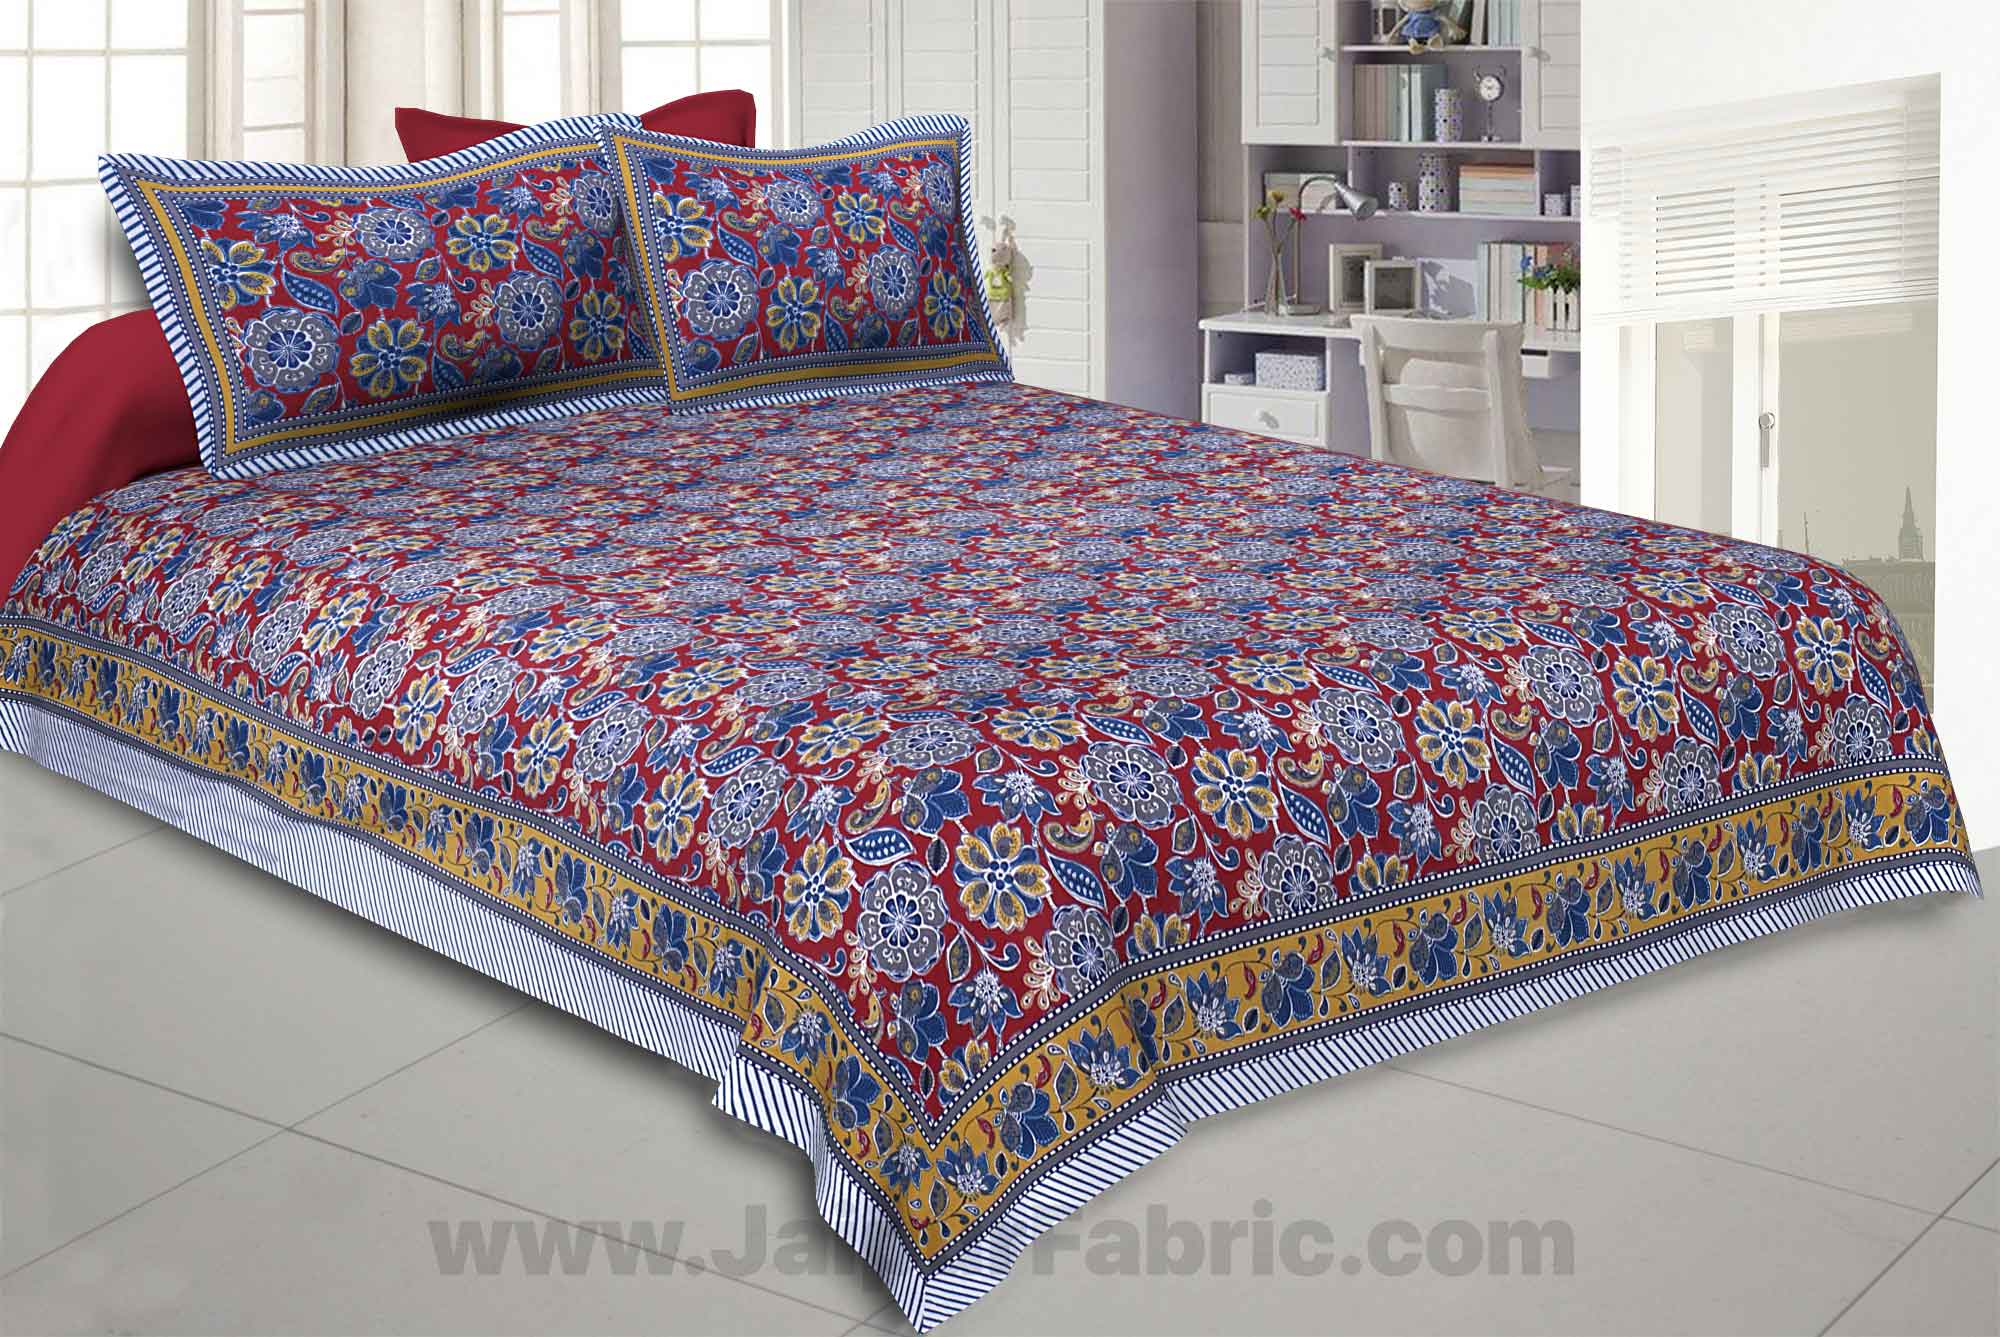 Awesome Mausam Maroon Double Bedsheet